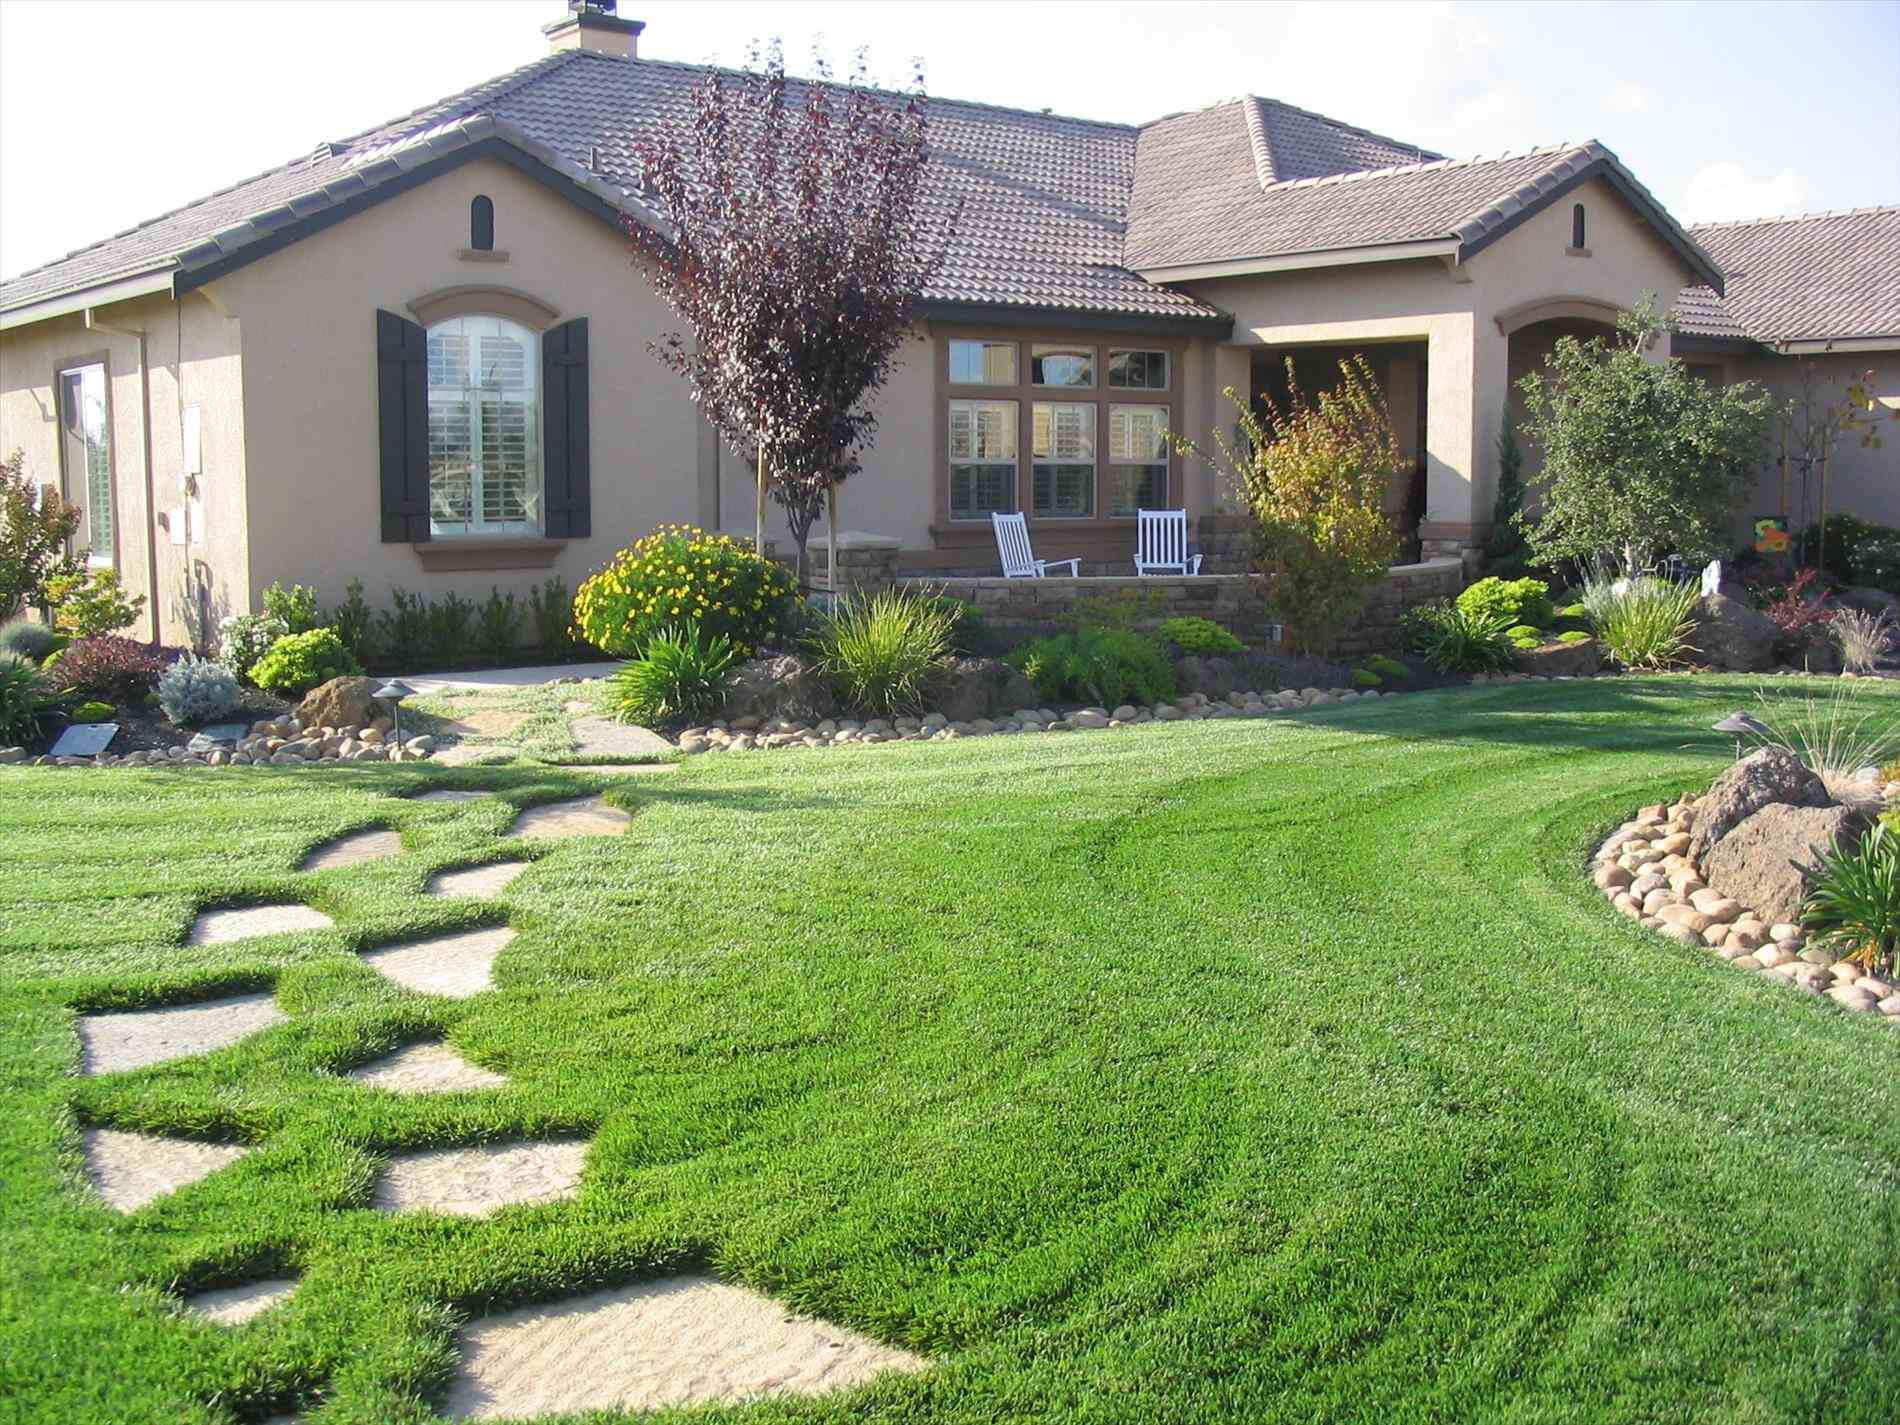 Landscape Front Of House
 Tips to Landscaping with Ranch Style Home Interior